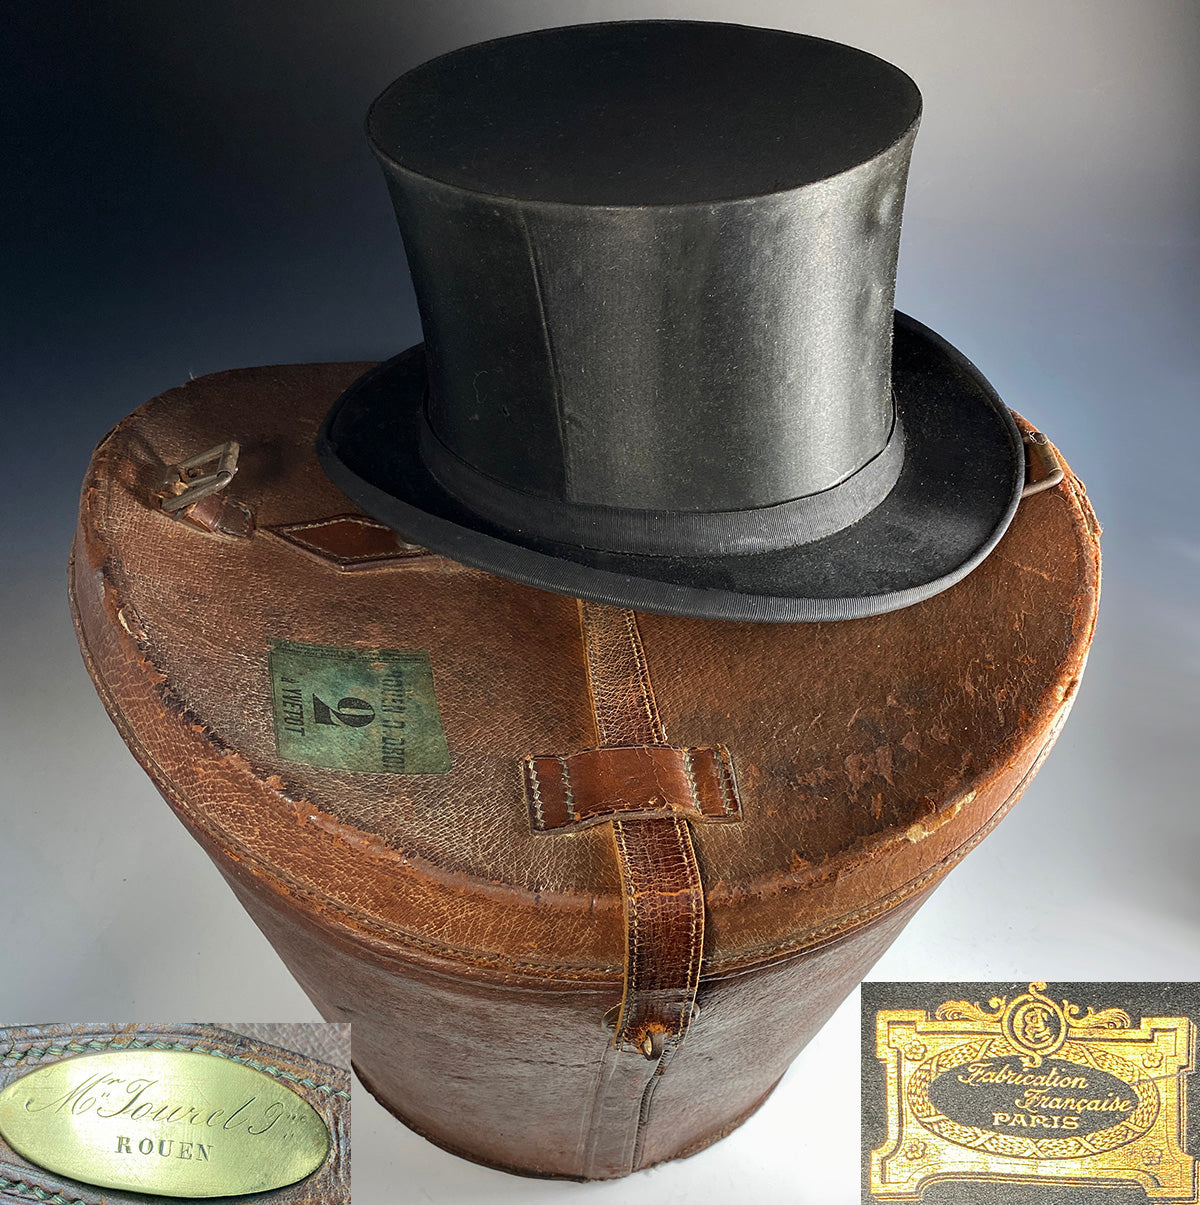 Antique Leather Top Hat Box, Luggage, French Silk Top Hat Inside. Collar Box